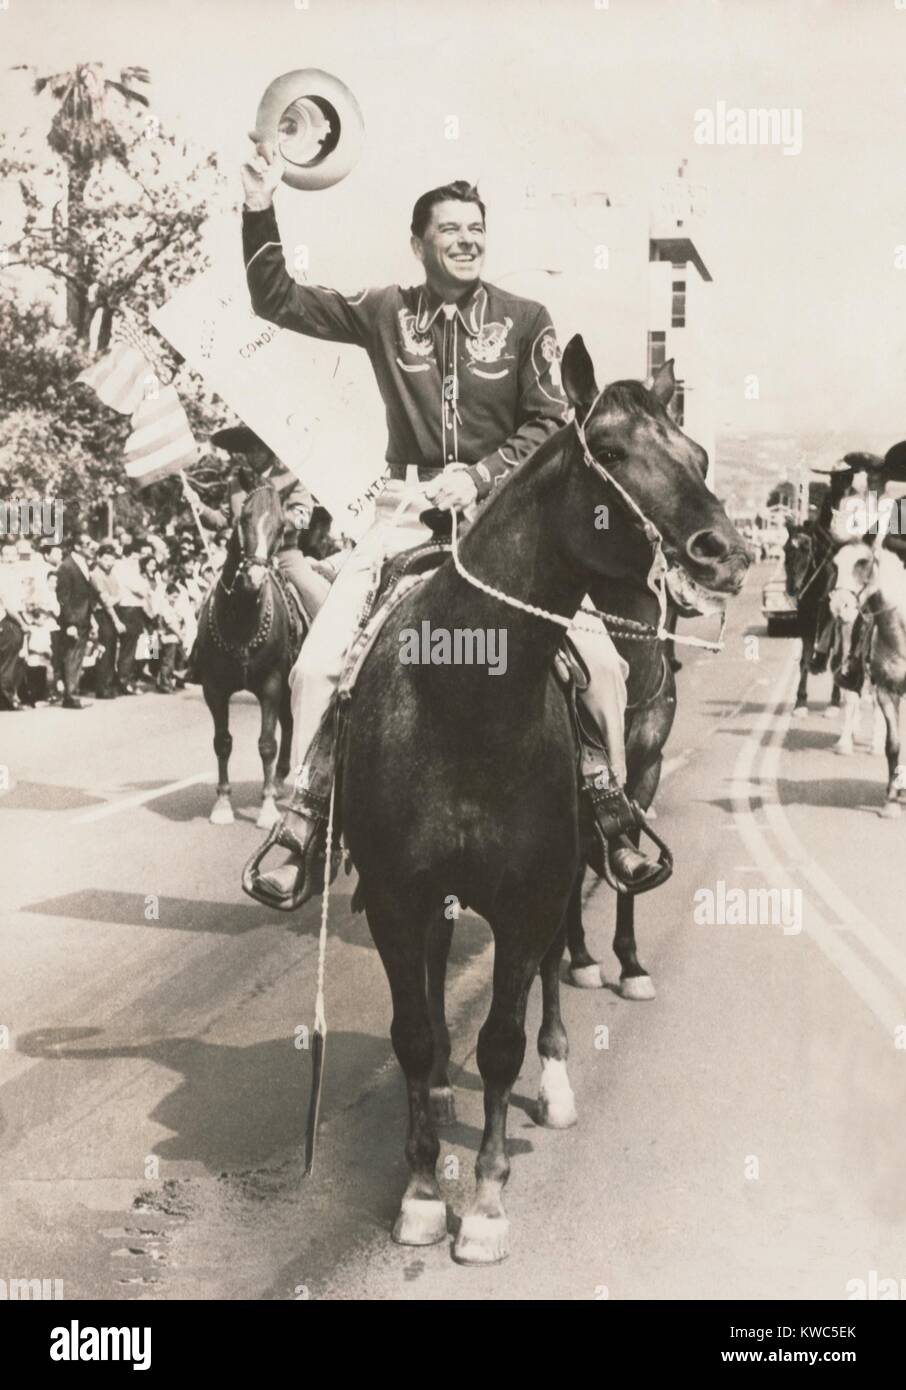 Ronald Reagan, newly elected Governor of California, riding a horse in a parade. Dec. 1966. (BSLOC 2015 14 74) Stock Photo